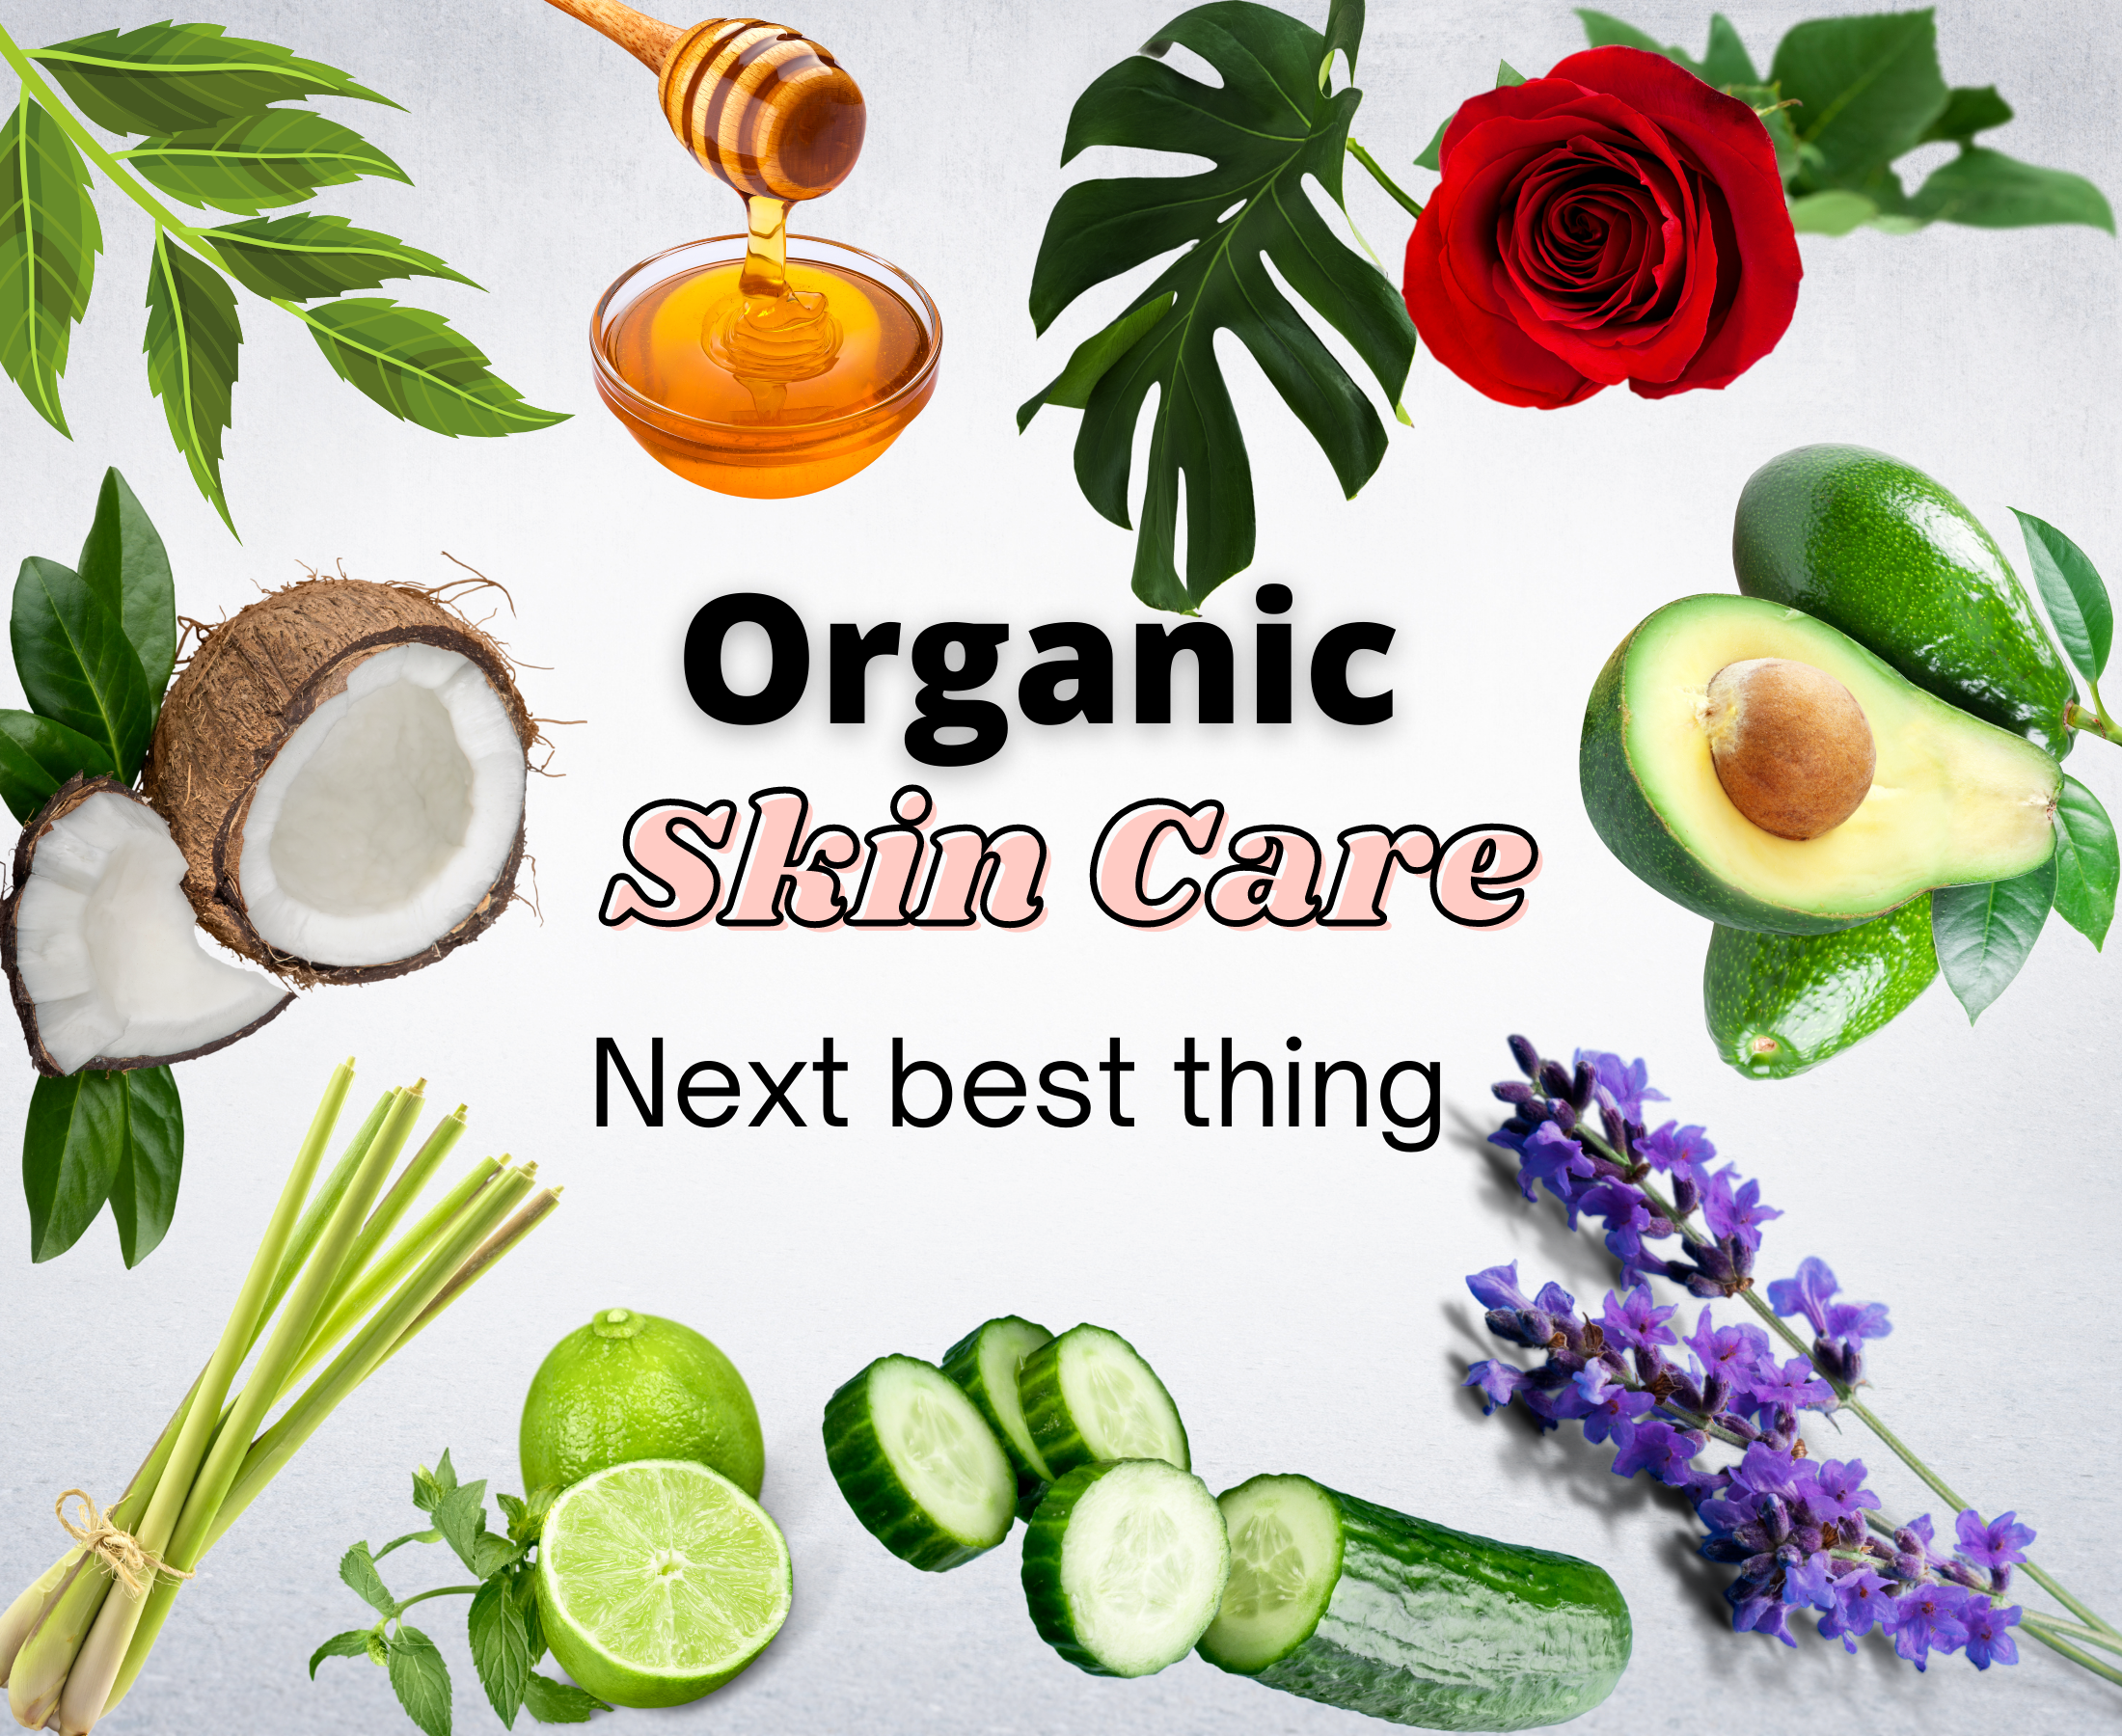 Is organic skincare is next best thing?